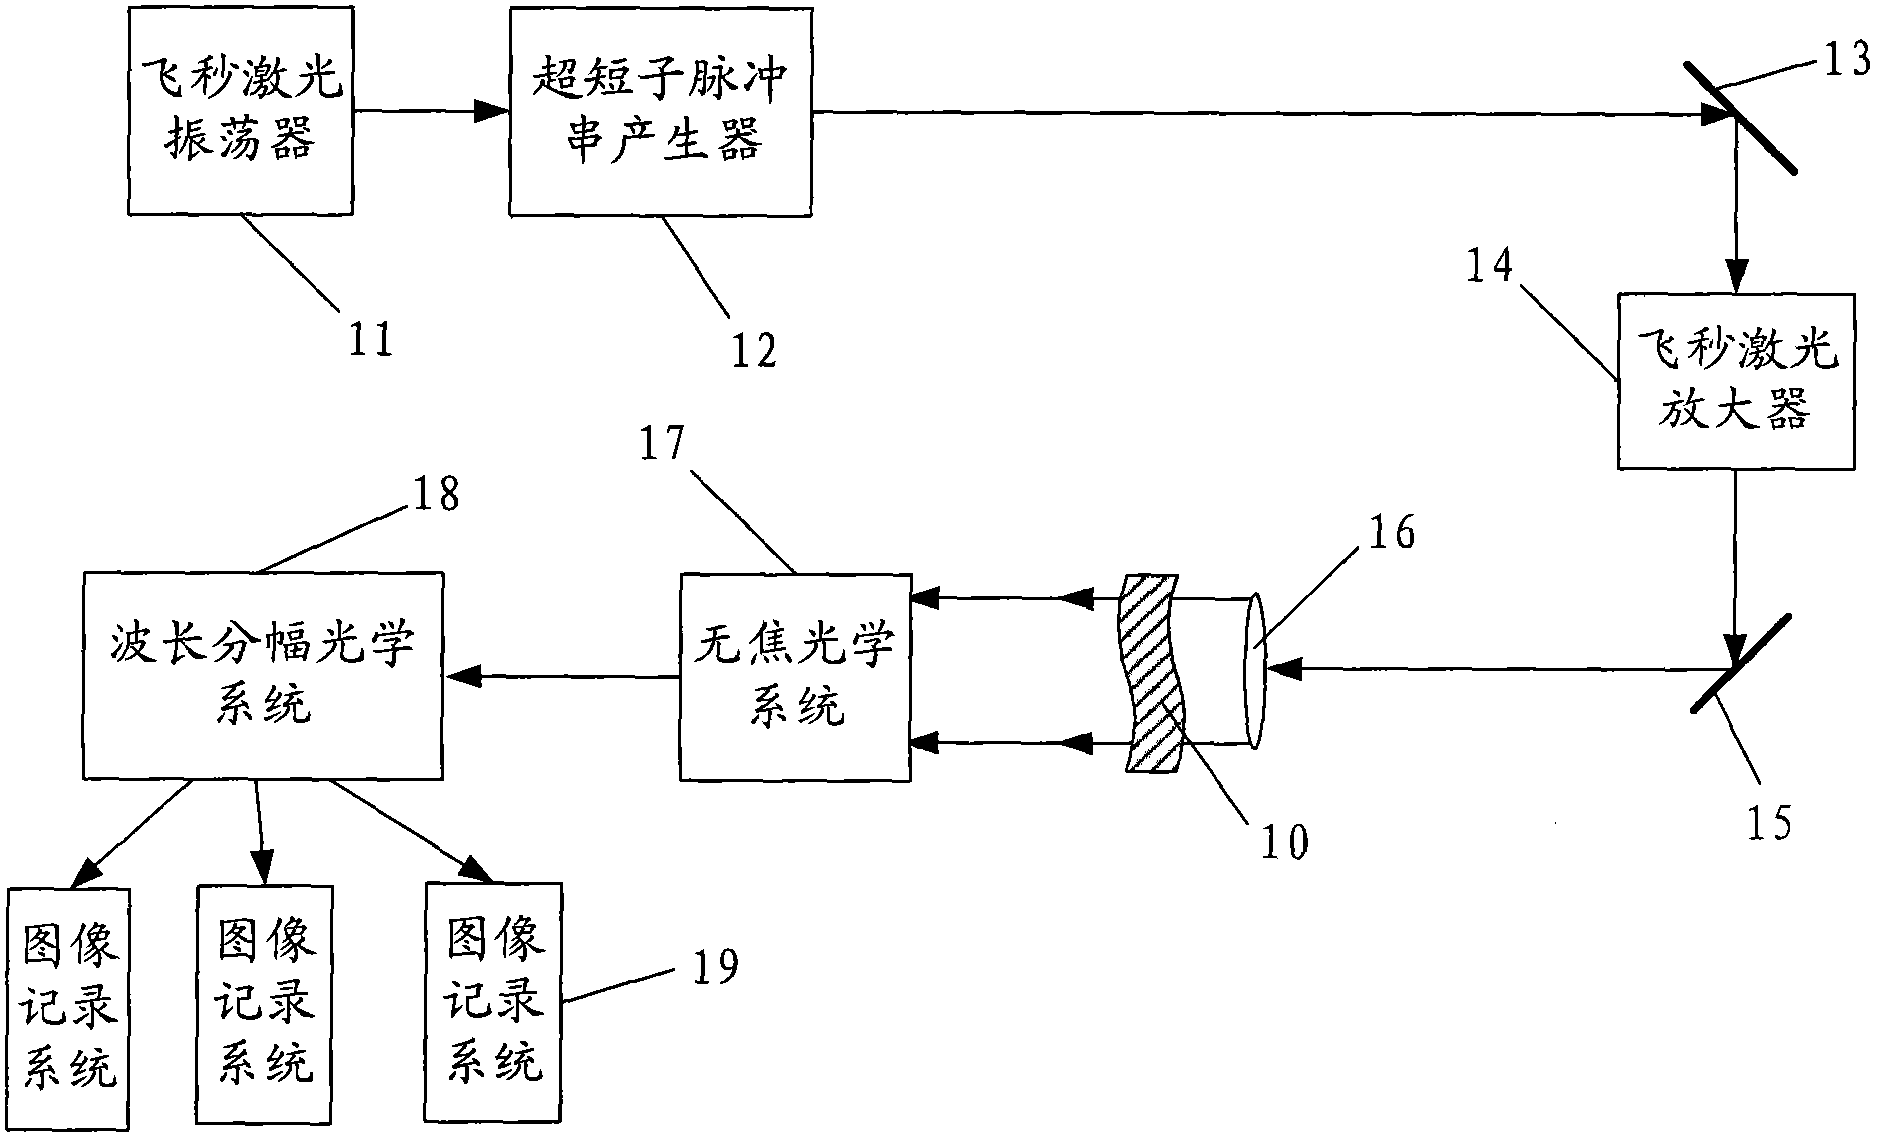 Ultra-short pulse dispersion reshaping and amplitude division technology-based ultrahigh-speed optical imaging system and method